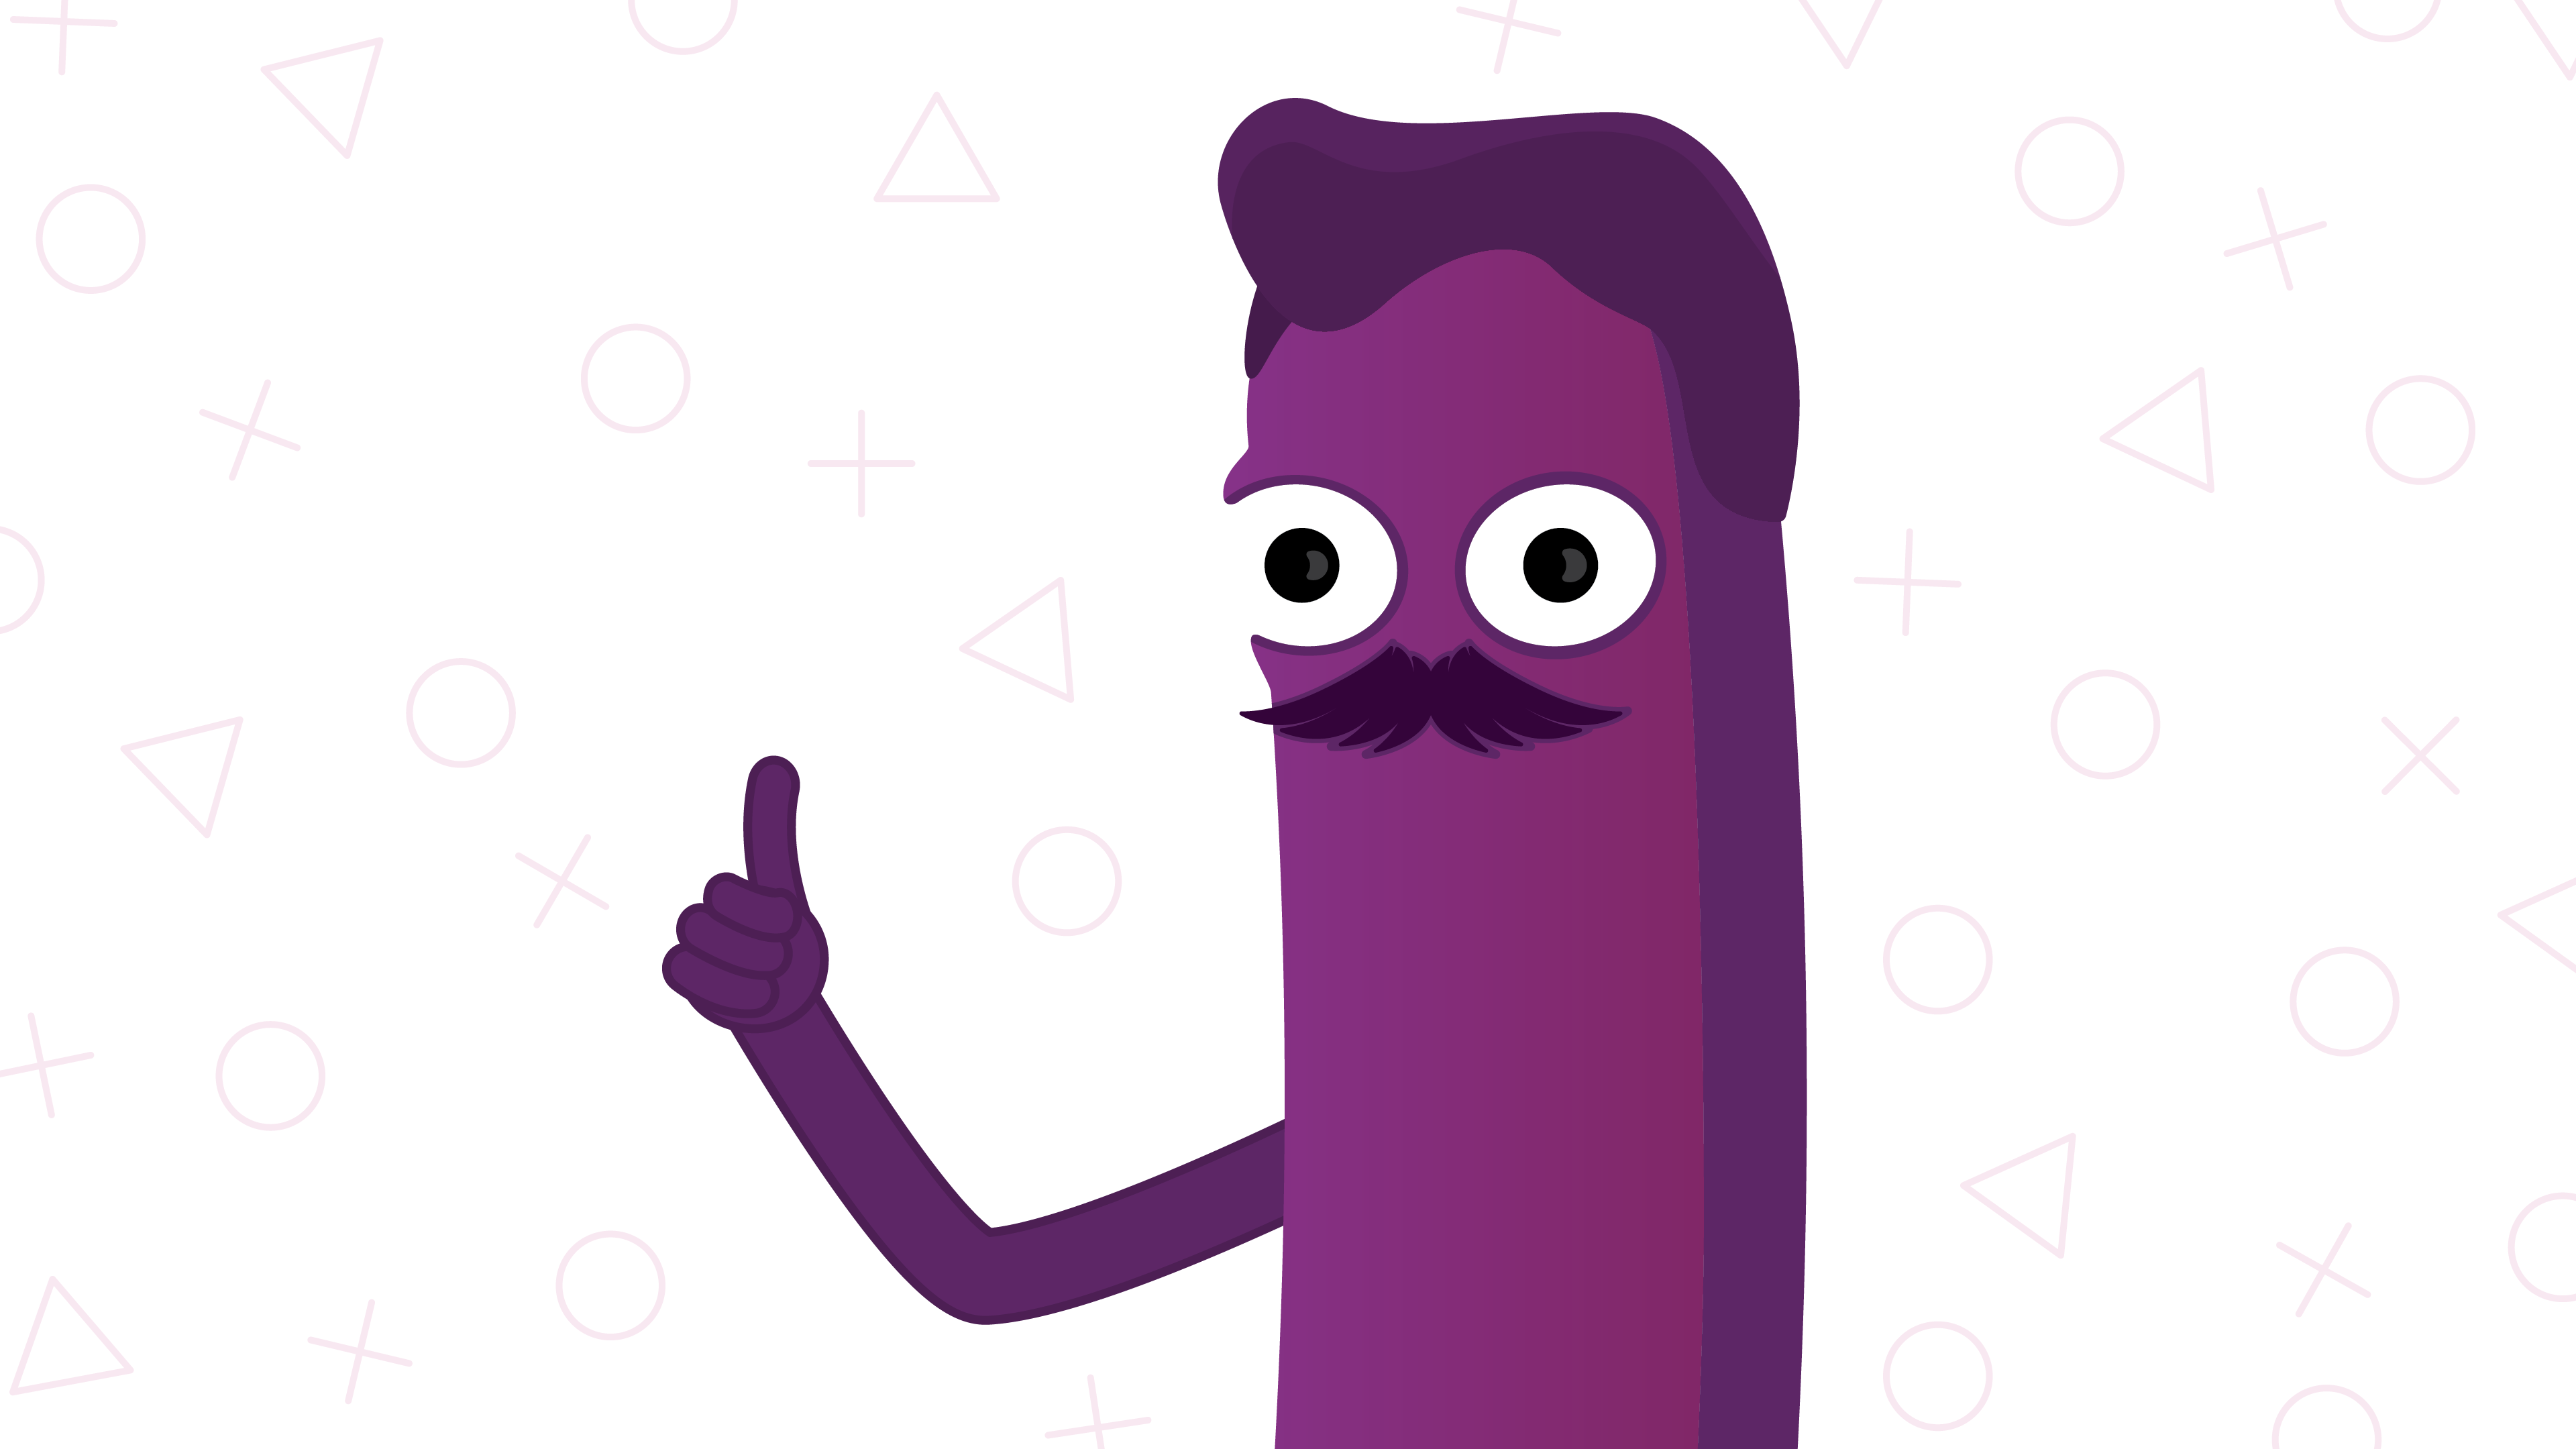 Noodle Dude - Daily Design by Aaron Ellis on Dribbble